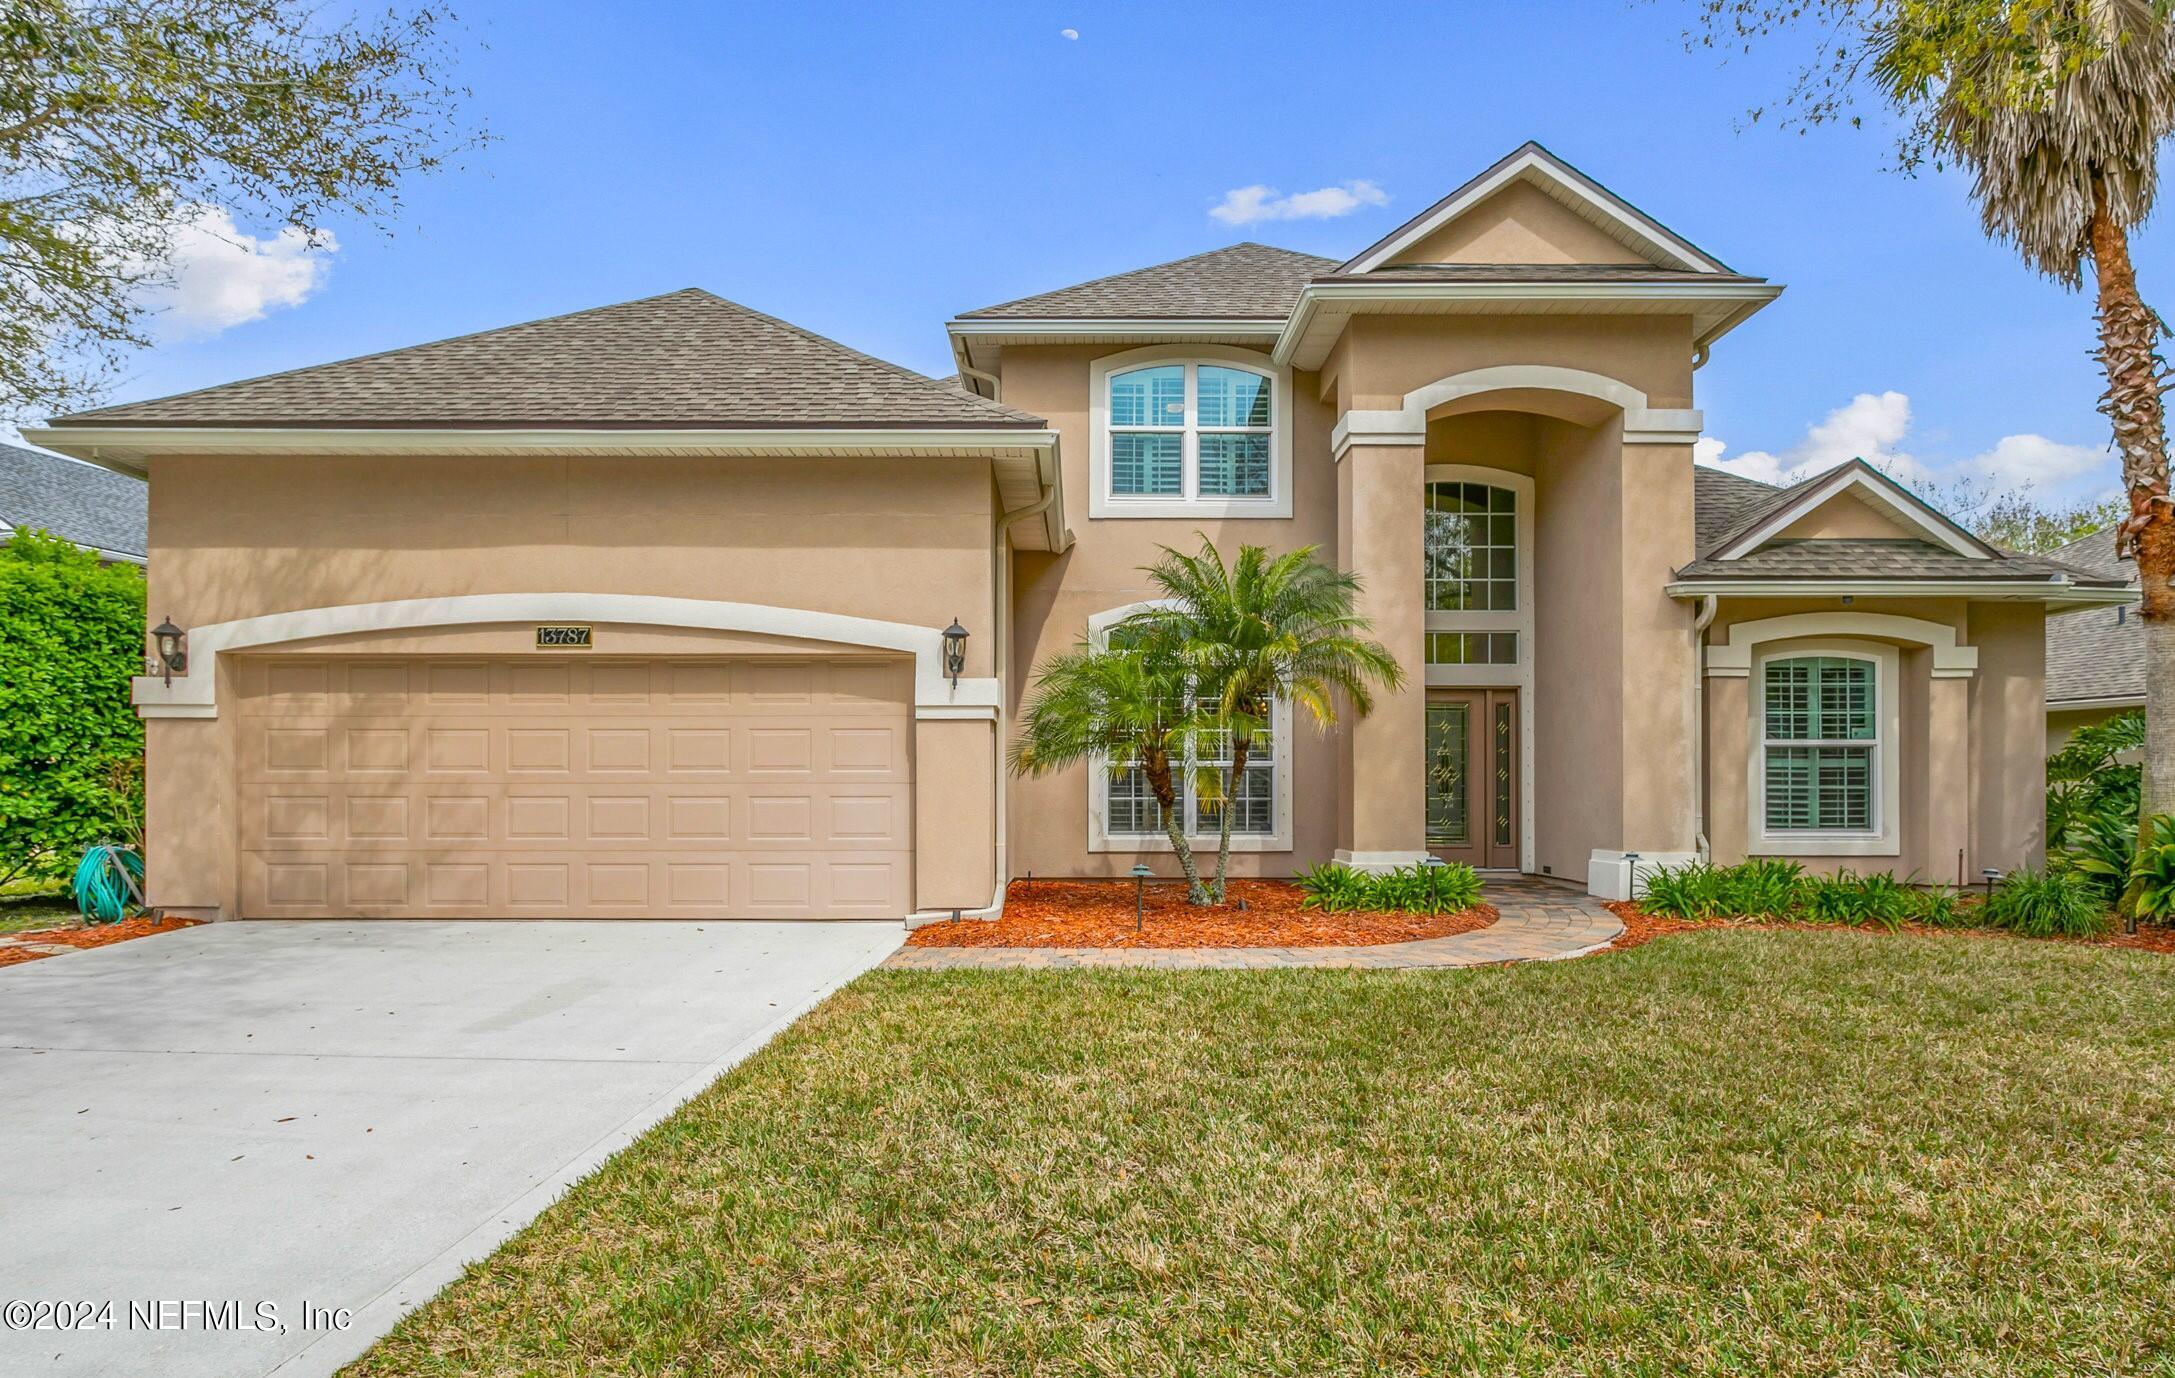 Jacksonville, FL home for sale located at 13787 White Heron Place, Jacksonville, FL 32224